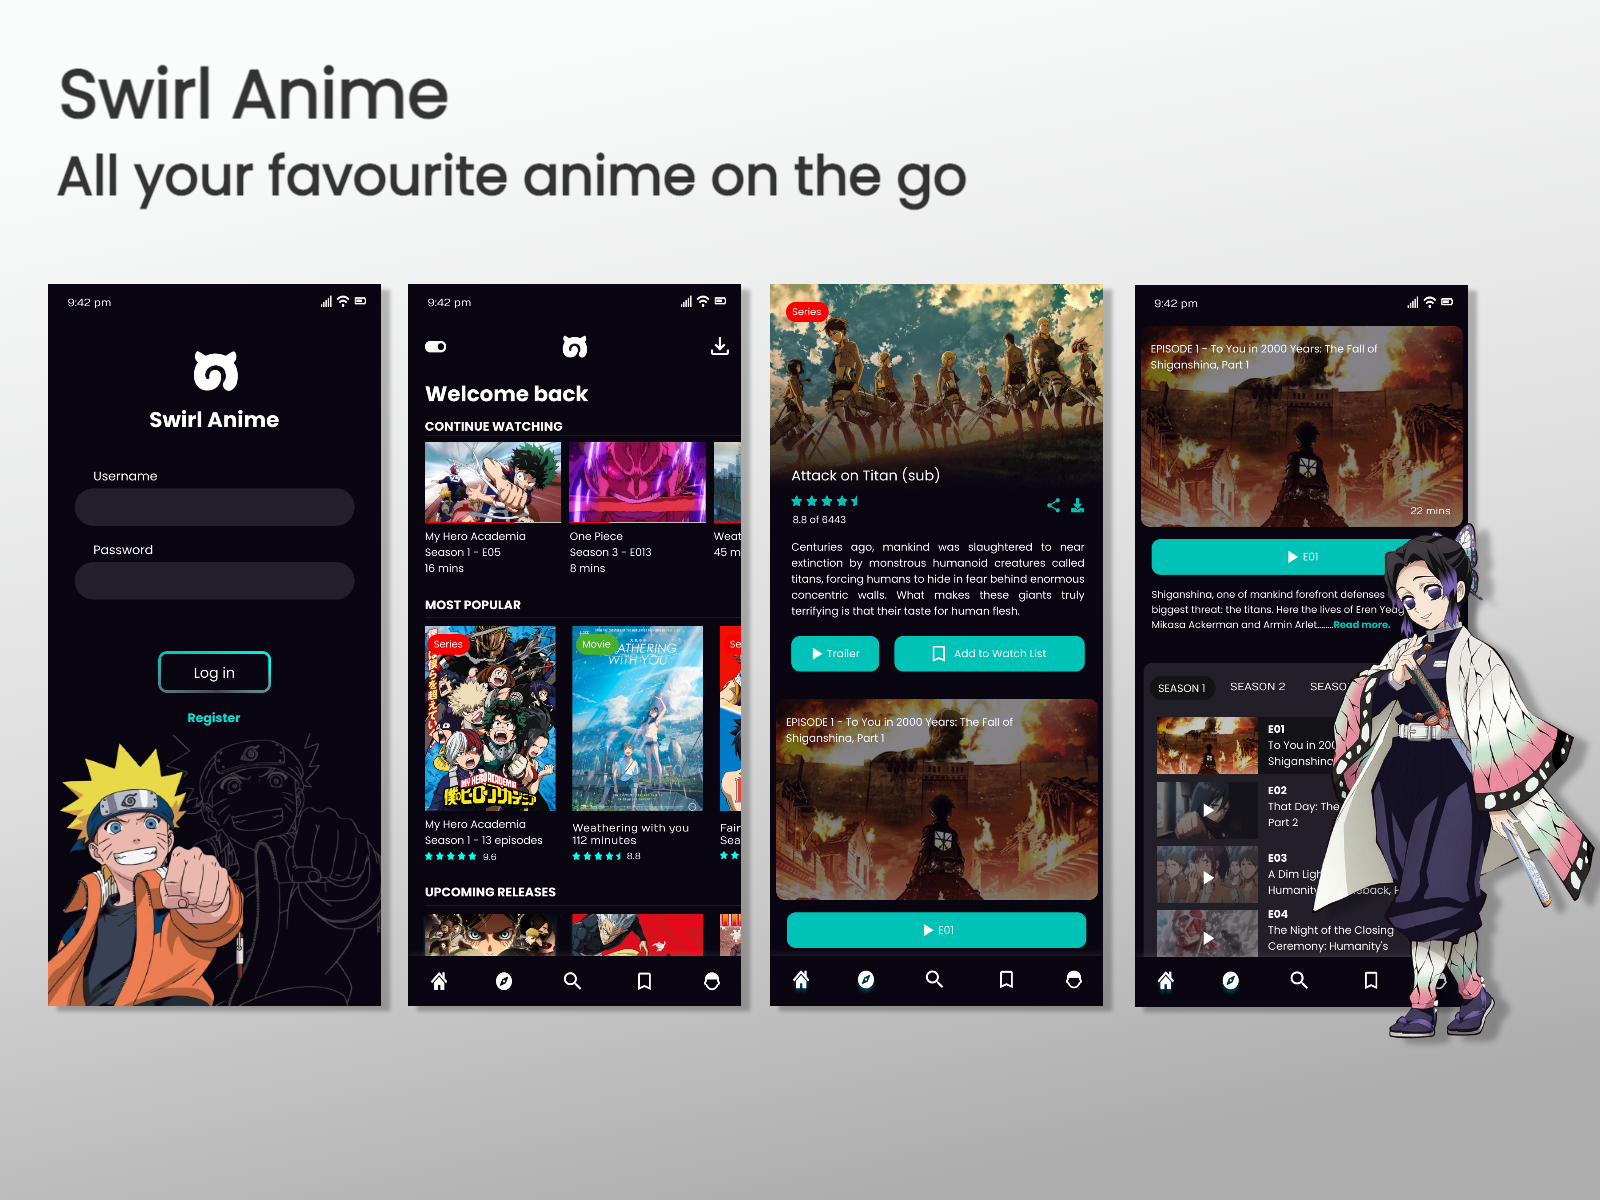 Watch More Dubbed Anime on Crunchyroll With New Dub Discoverability Feature  - Crunchyroll News